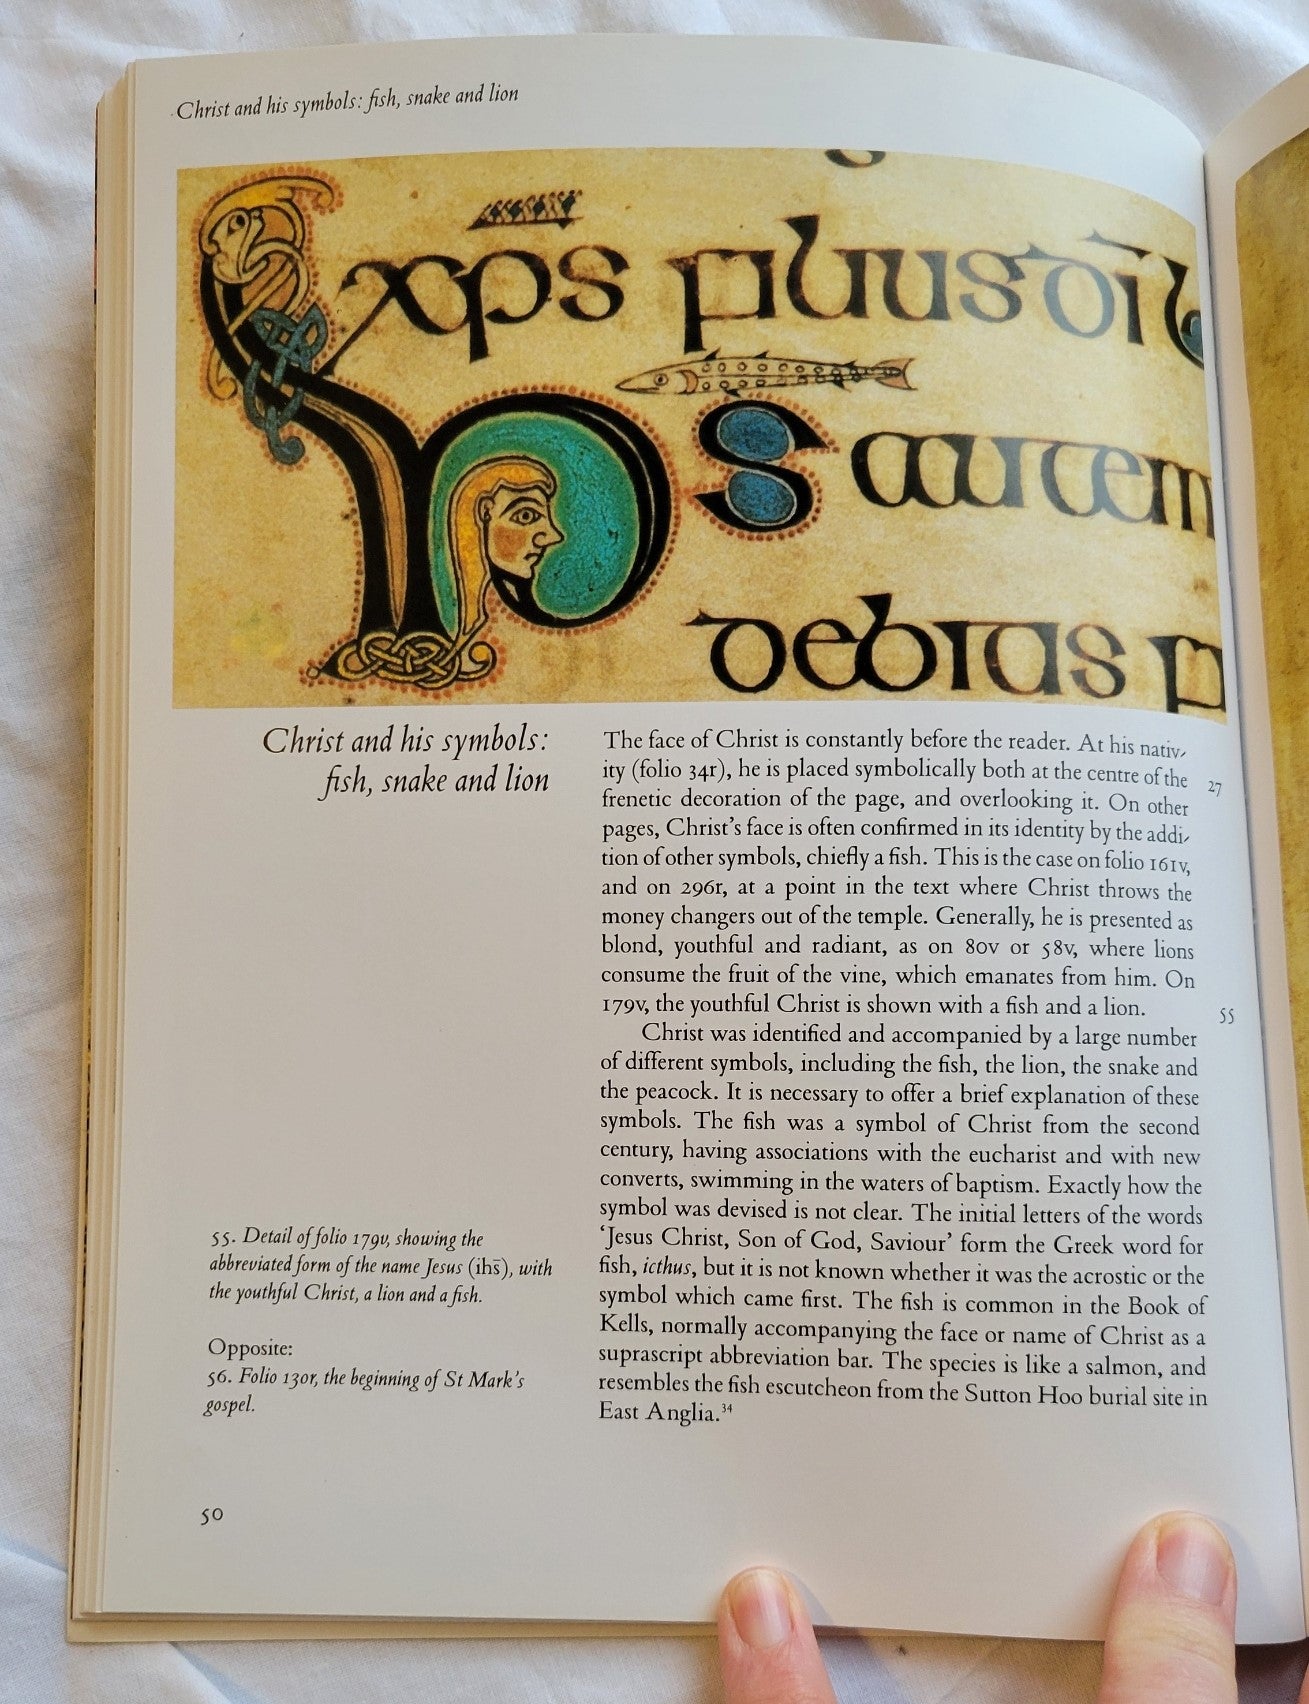  Used book for sale "The Book of Kells: An Illustrated Introduction to the Manuscript in Trinity College Dublin" by Bernard Meehan, published by Thames & Hudson, Ltd, copyright 1994, reprint in 2013. Page 50